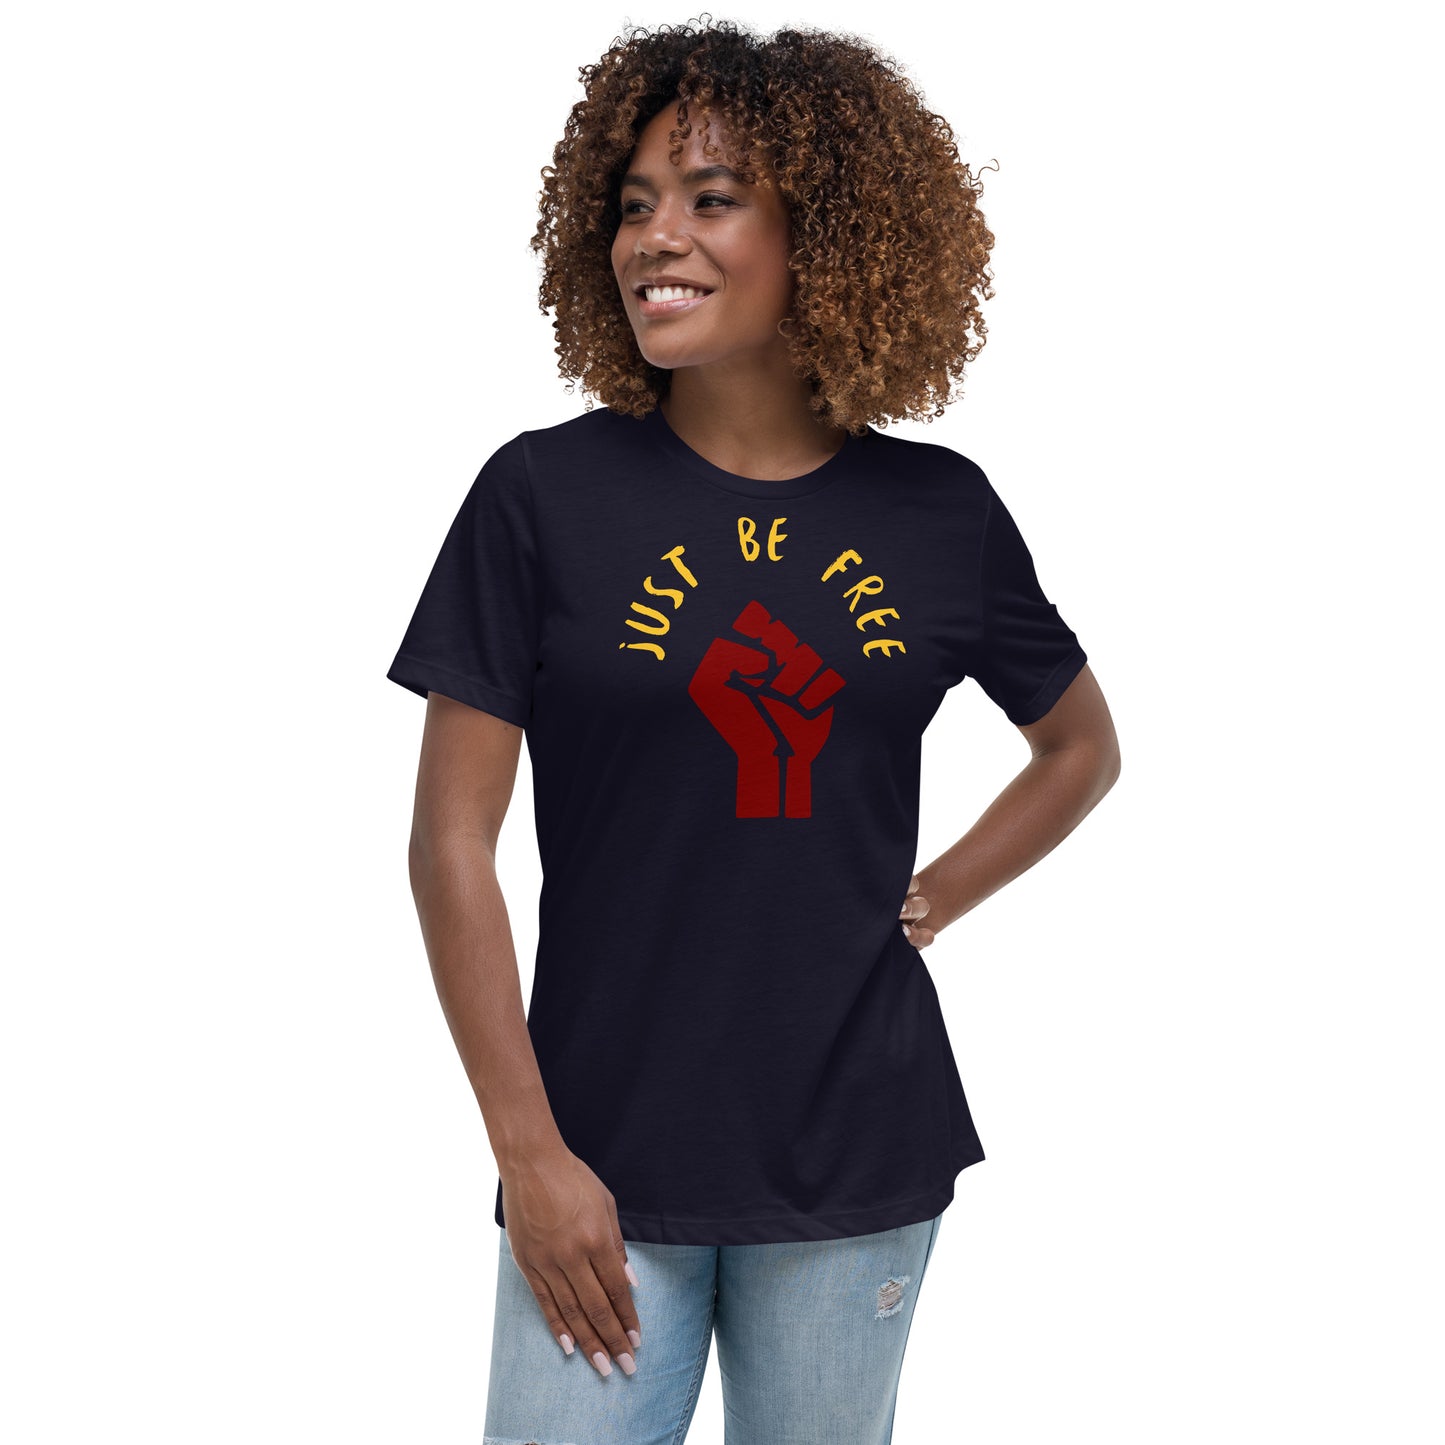 Anarchy Wear "Just Be Free" Unity Women's Relaxed T-Shirt